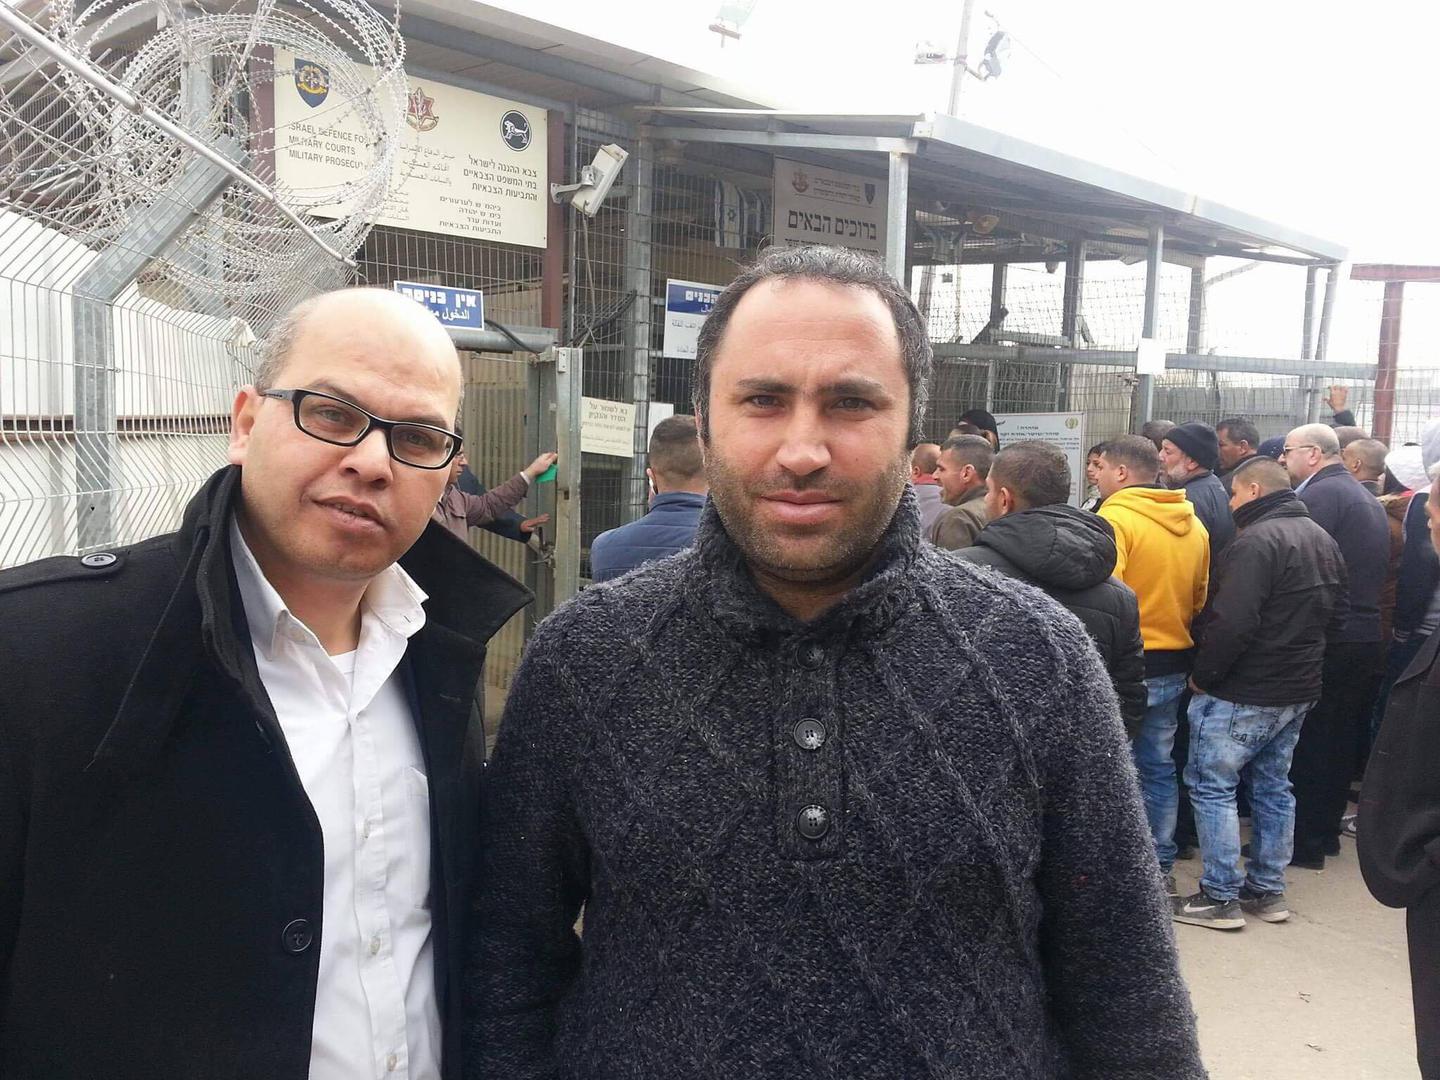 Issa Amro and Farid al-Atrash at Ofer Prison in the occupied West Bank on March 26, 2017.